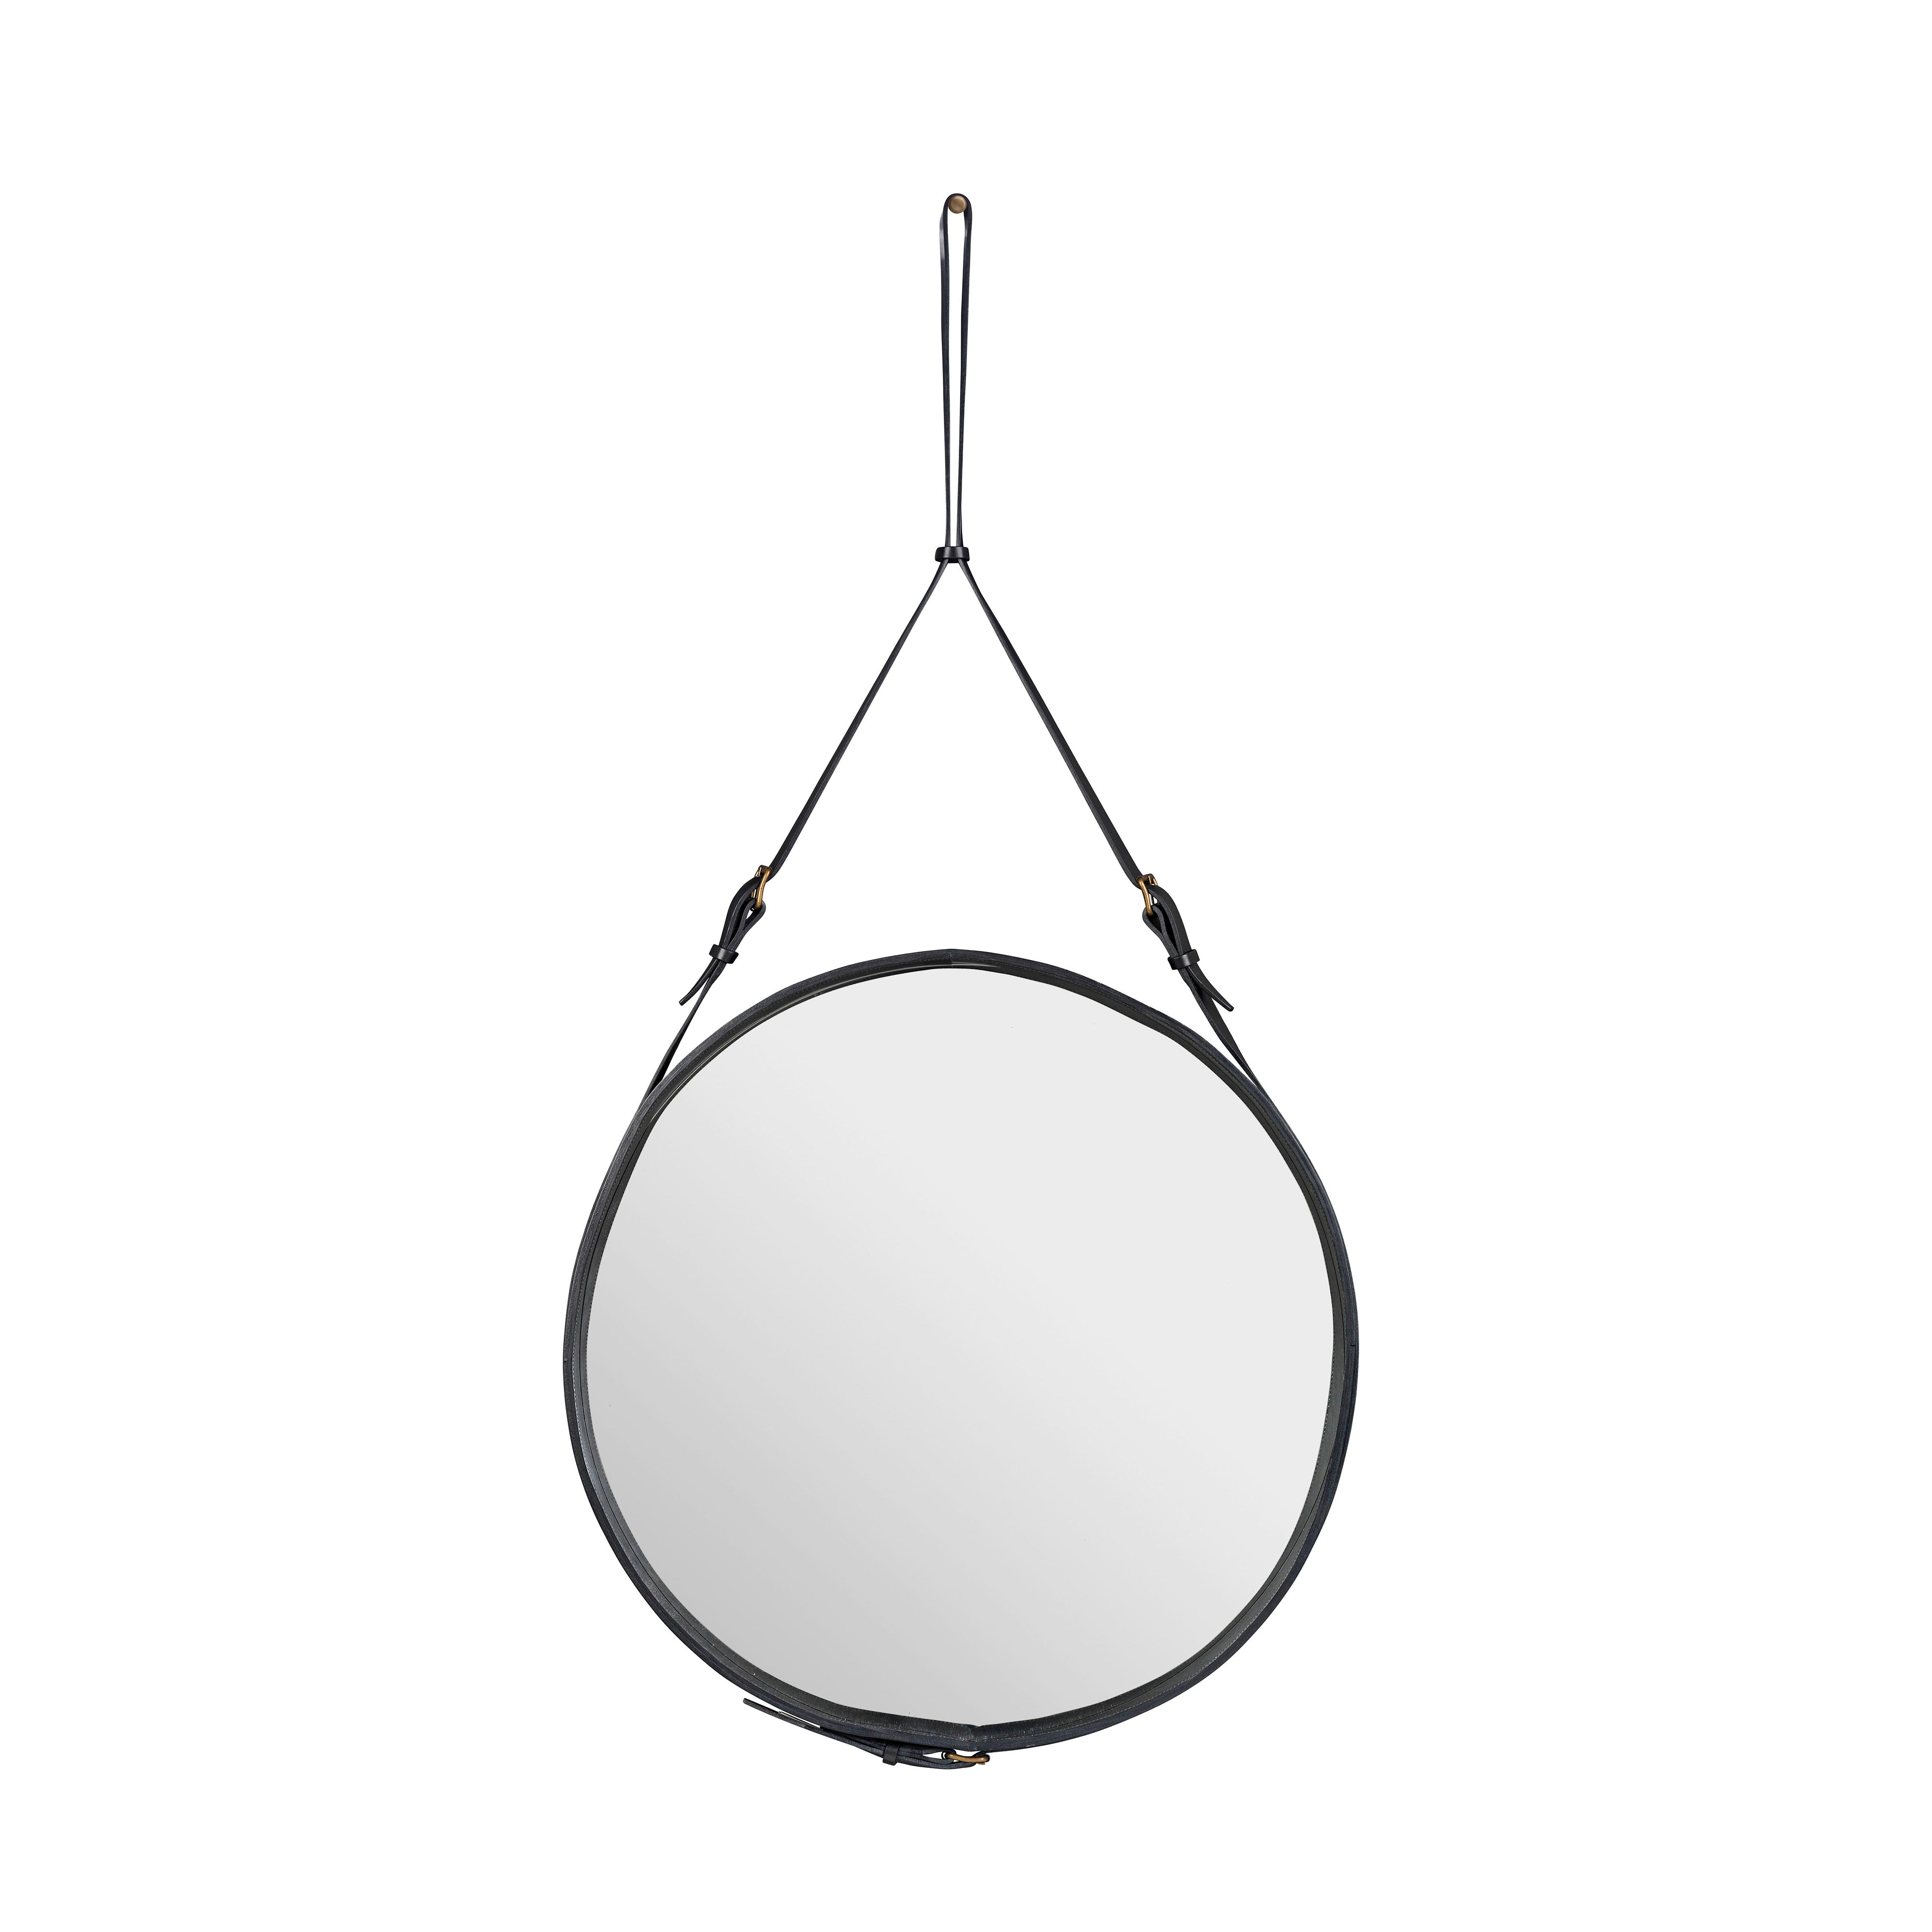 Adnet Circulaire Wall Mirror: Large - 27.6